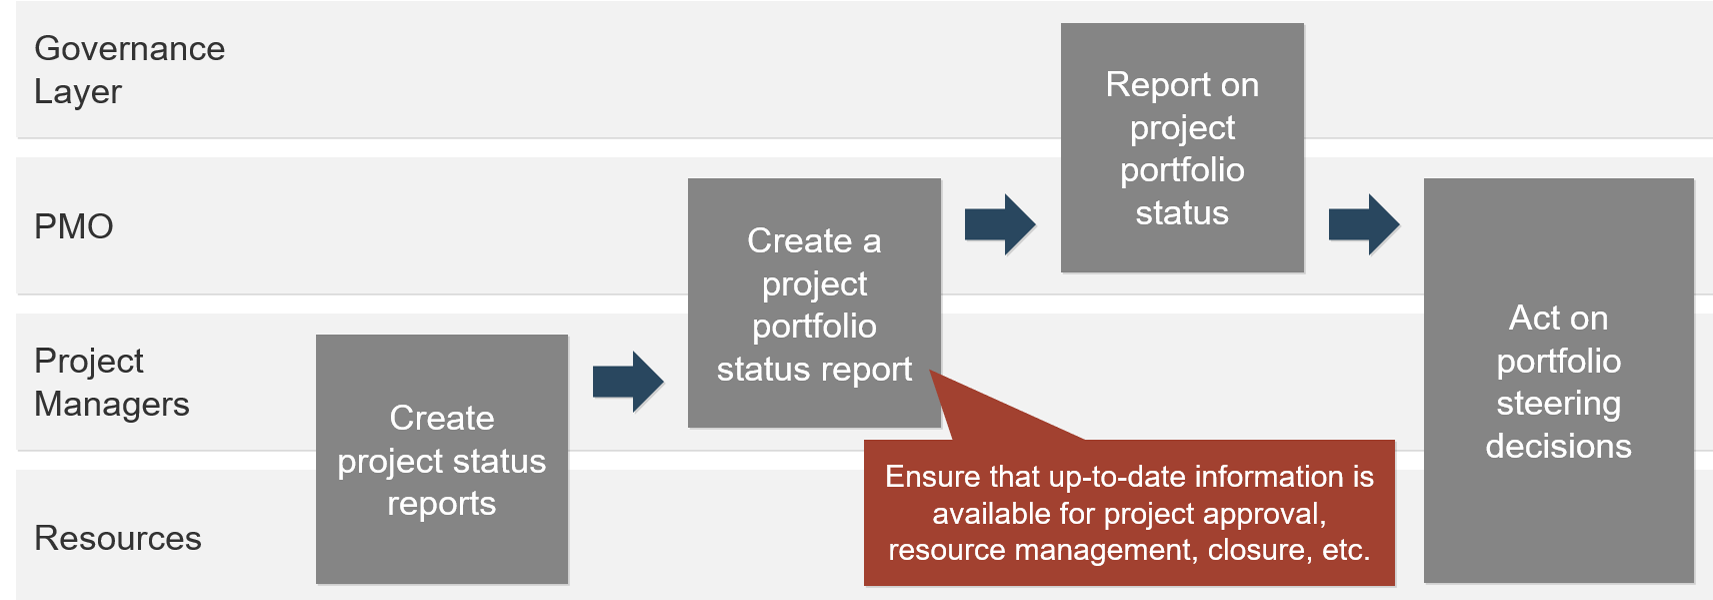 A diagram of Info-Tech's four-step process for portfolio status and progress reporting. There are four groups that may be involved in any one step, they are laid out on the side as row headers that each step's columns may fall into, 'Resources', 'Project Managers', 'PMO', and 'Governance Layer'. The first step is 'Create project status reports' which involves 'Resources' and 'Project Managers'. Step 2 is 'Create a project portfolio status report' which involves 'Project Managers' and 'PMO', with a note that reads 'Ensure that up-to-date information is available for project approval, resource management, closure, etc.' Step 3 is 'Report on project portfolio status' which involves 'PMO' and 'Governance layer'. Step 4 is 'Act on portfolio steering decisions' which involves 'Resources', 'Project Managers' and 'PMO'.